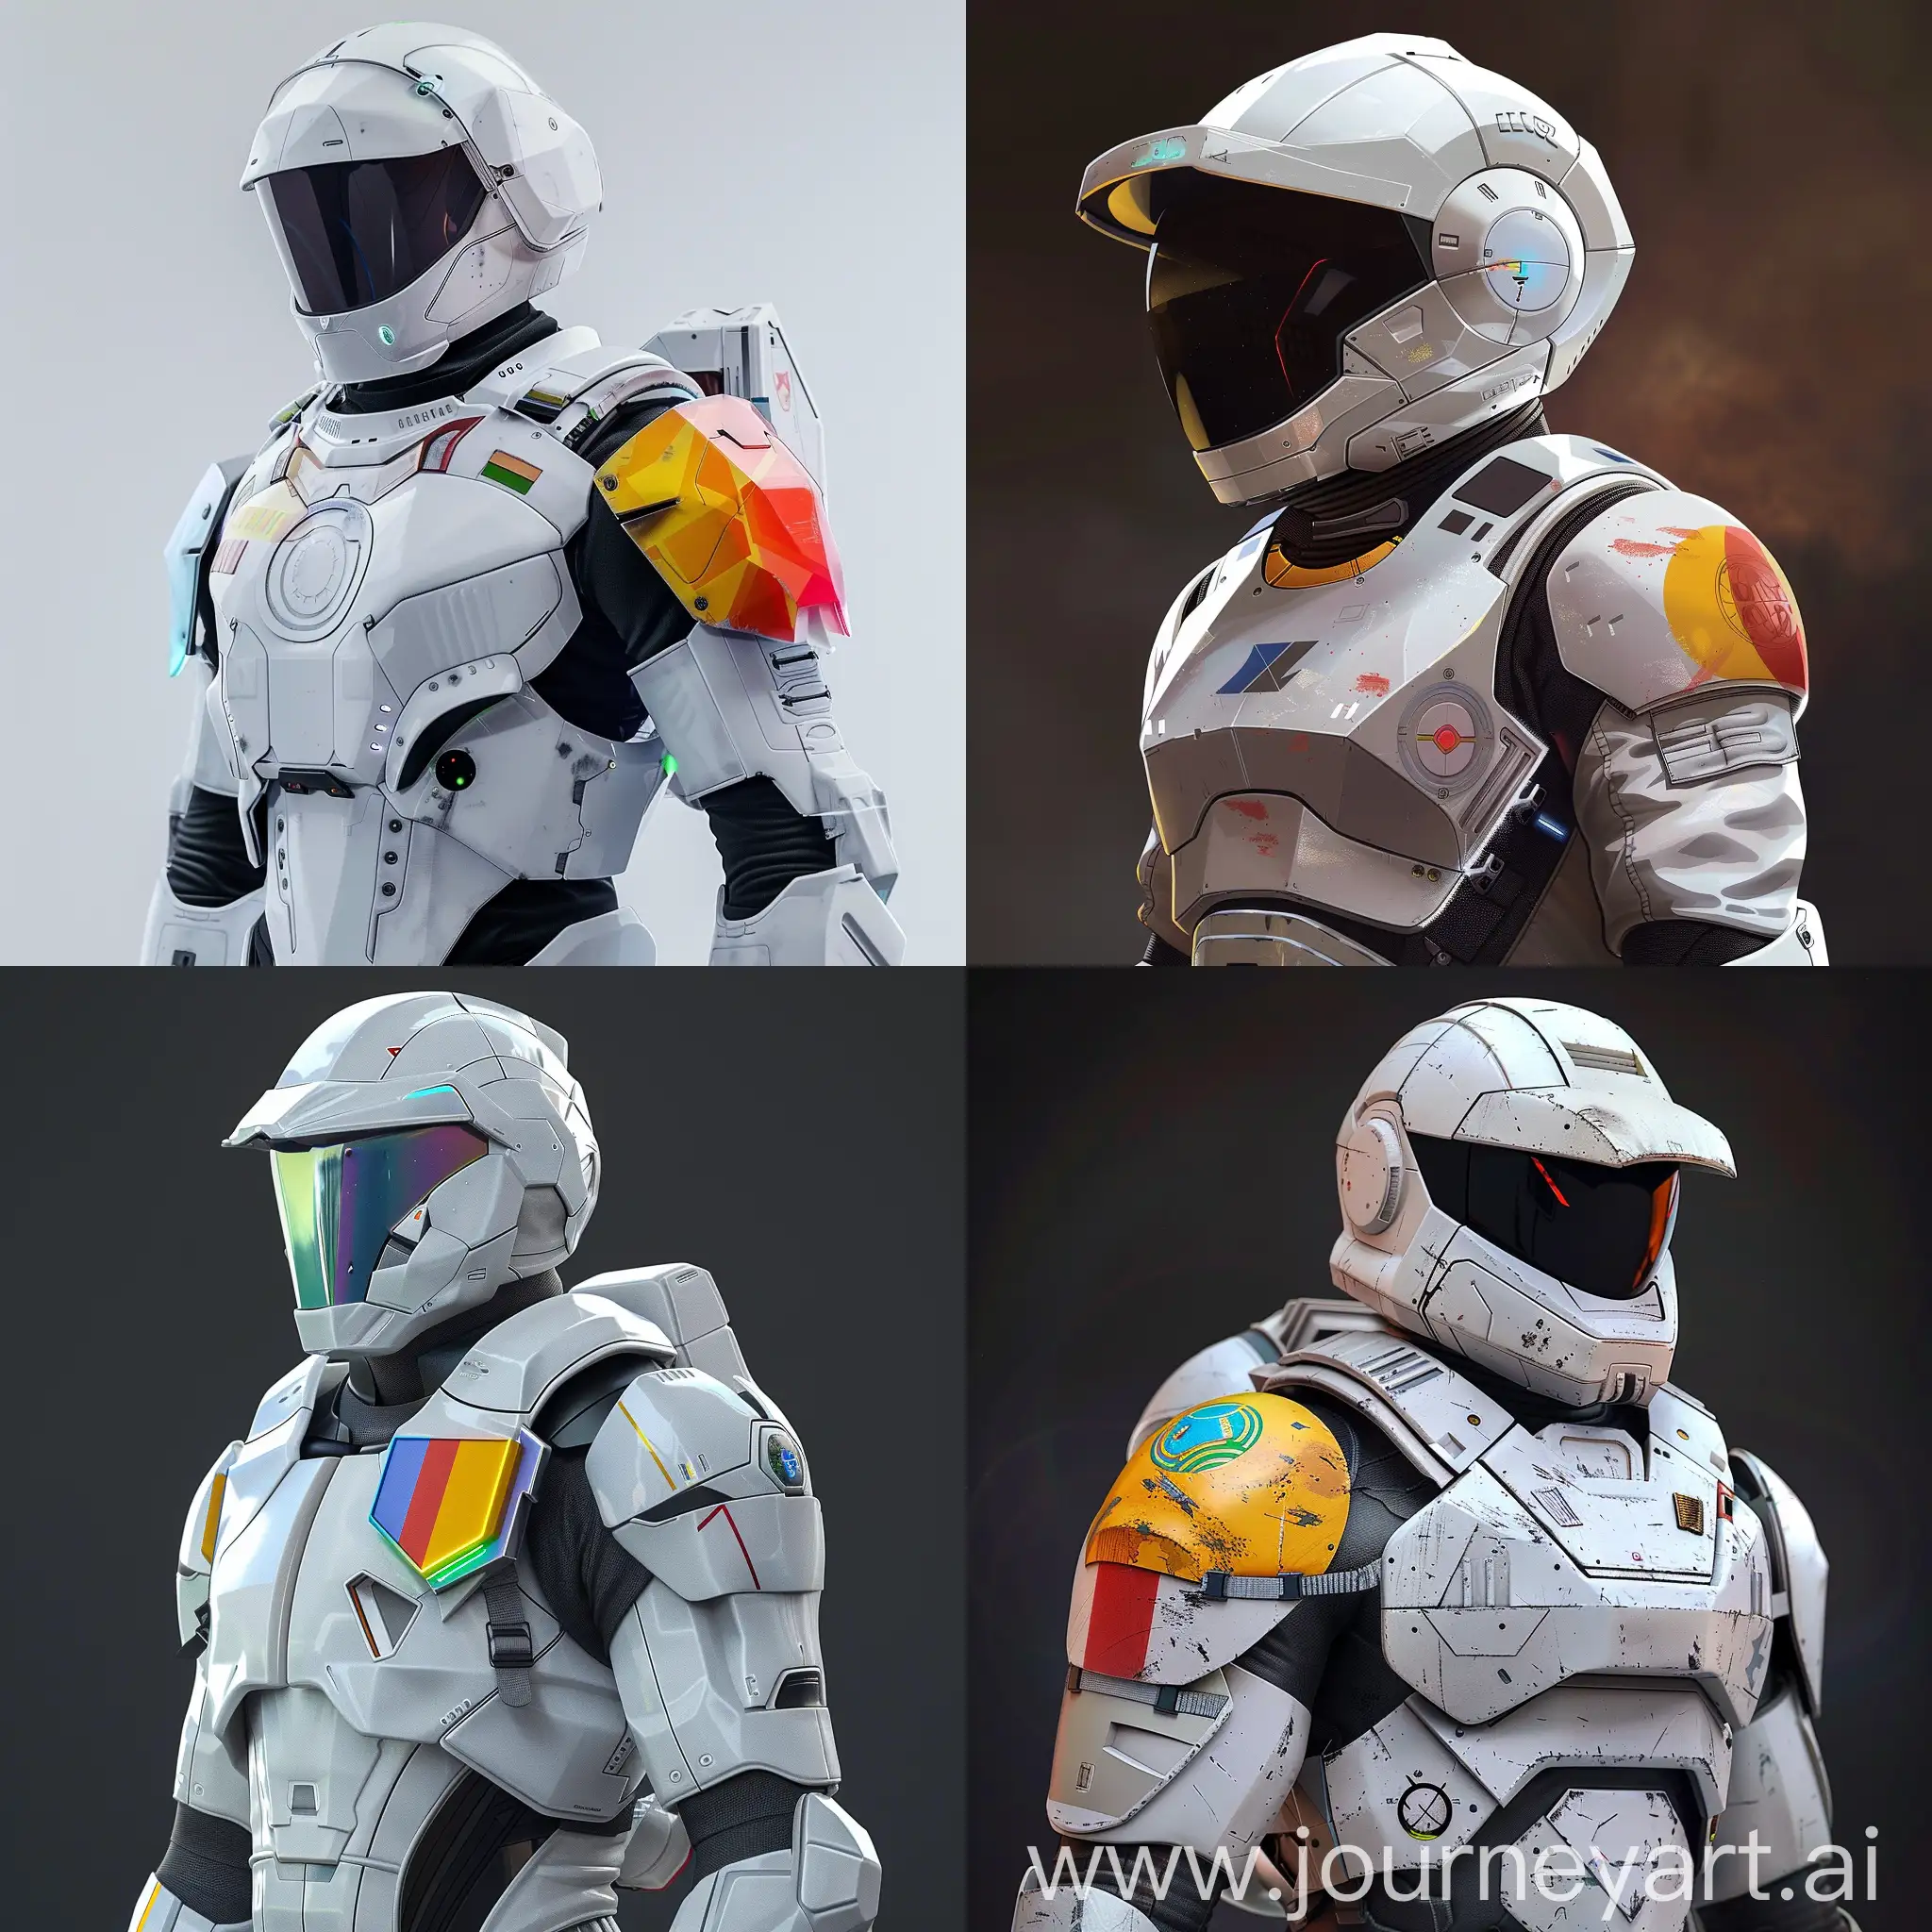 Galactic-Union-Soldier-in-SciFi-Armor-with-Planet-Logo-and-ColorCoded-Ranks